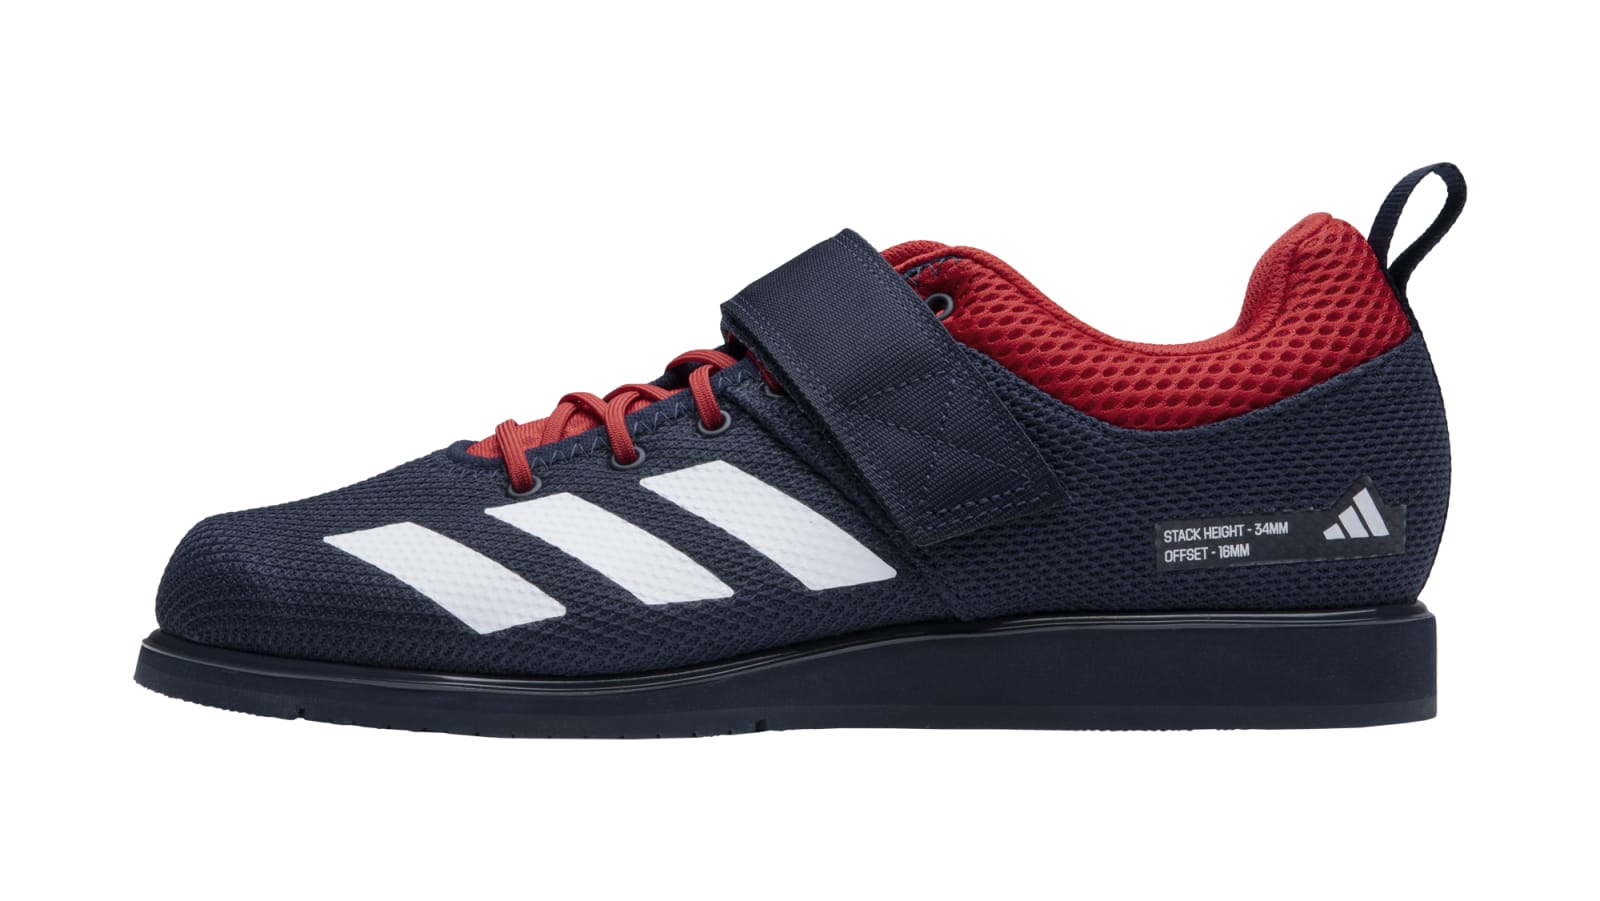 Adidas Powerlift 5 Weightlifting Shoes - Team Navy Blue 2 / FTWR White / Better Scarlet